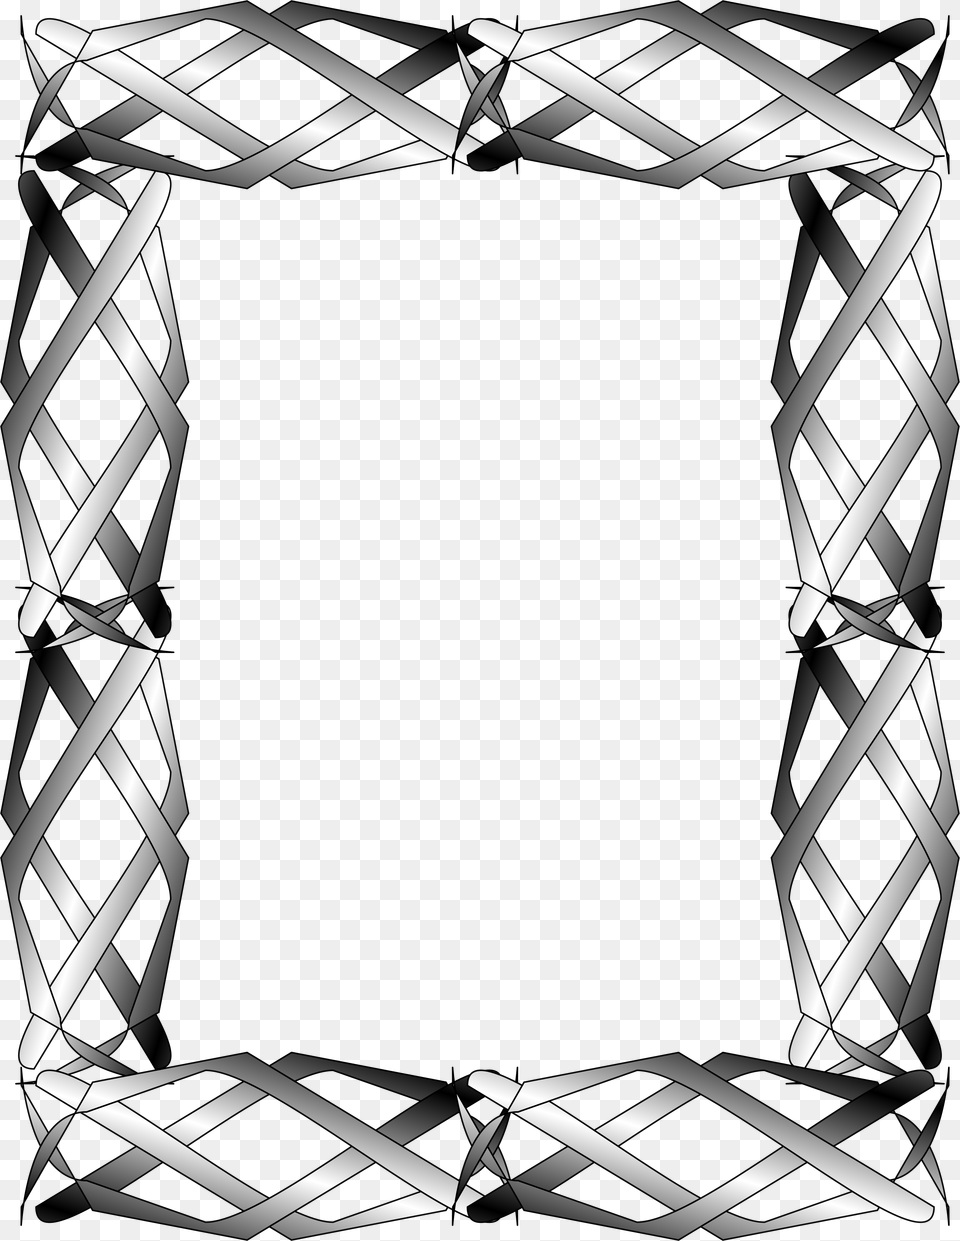 Celtic Silver Frame Border No Ratings Yet Abstract Border Frame Clipart Free Png